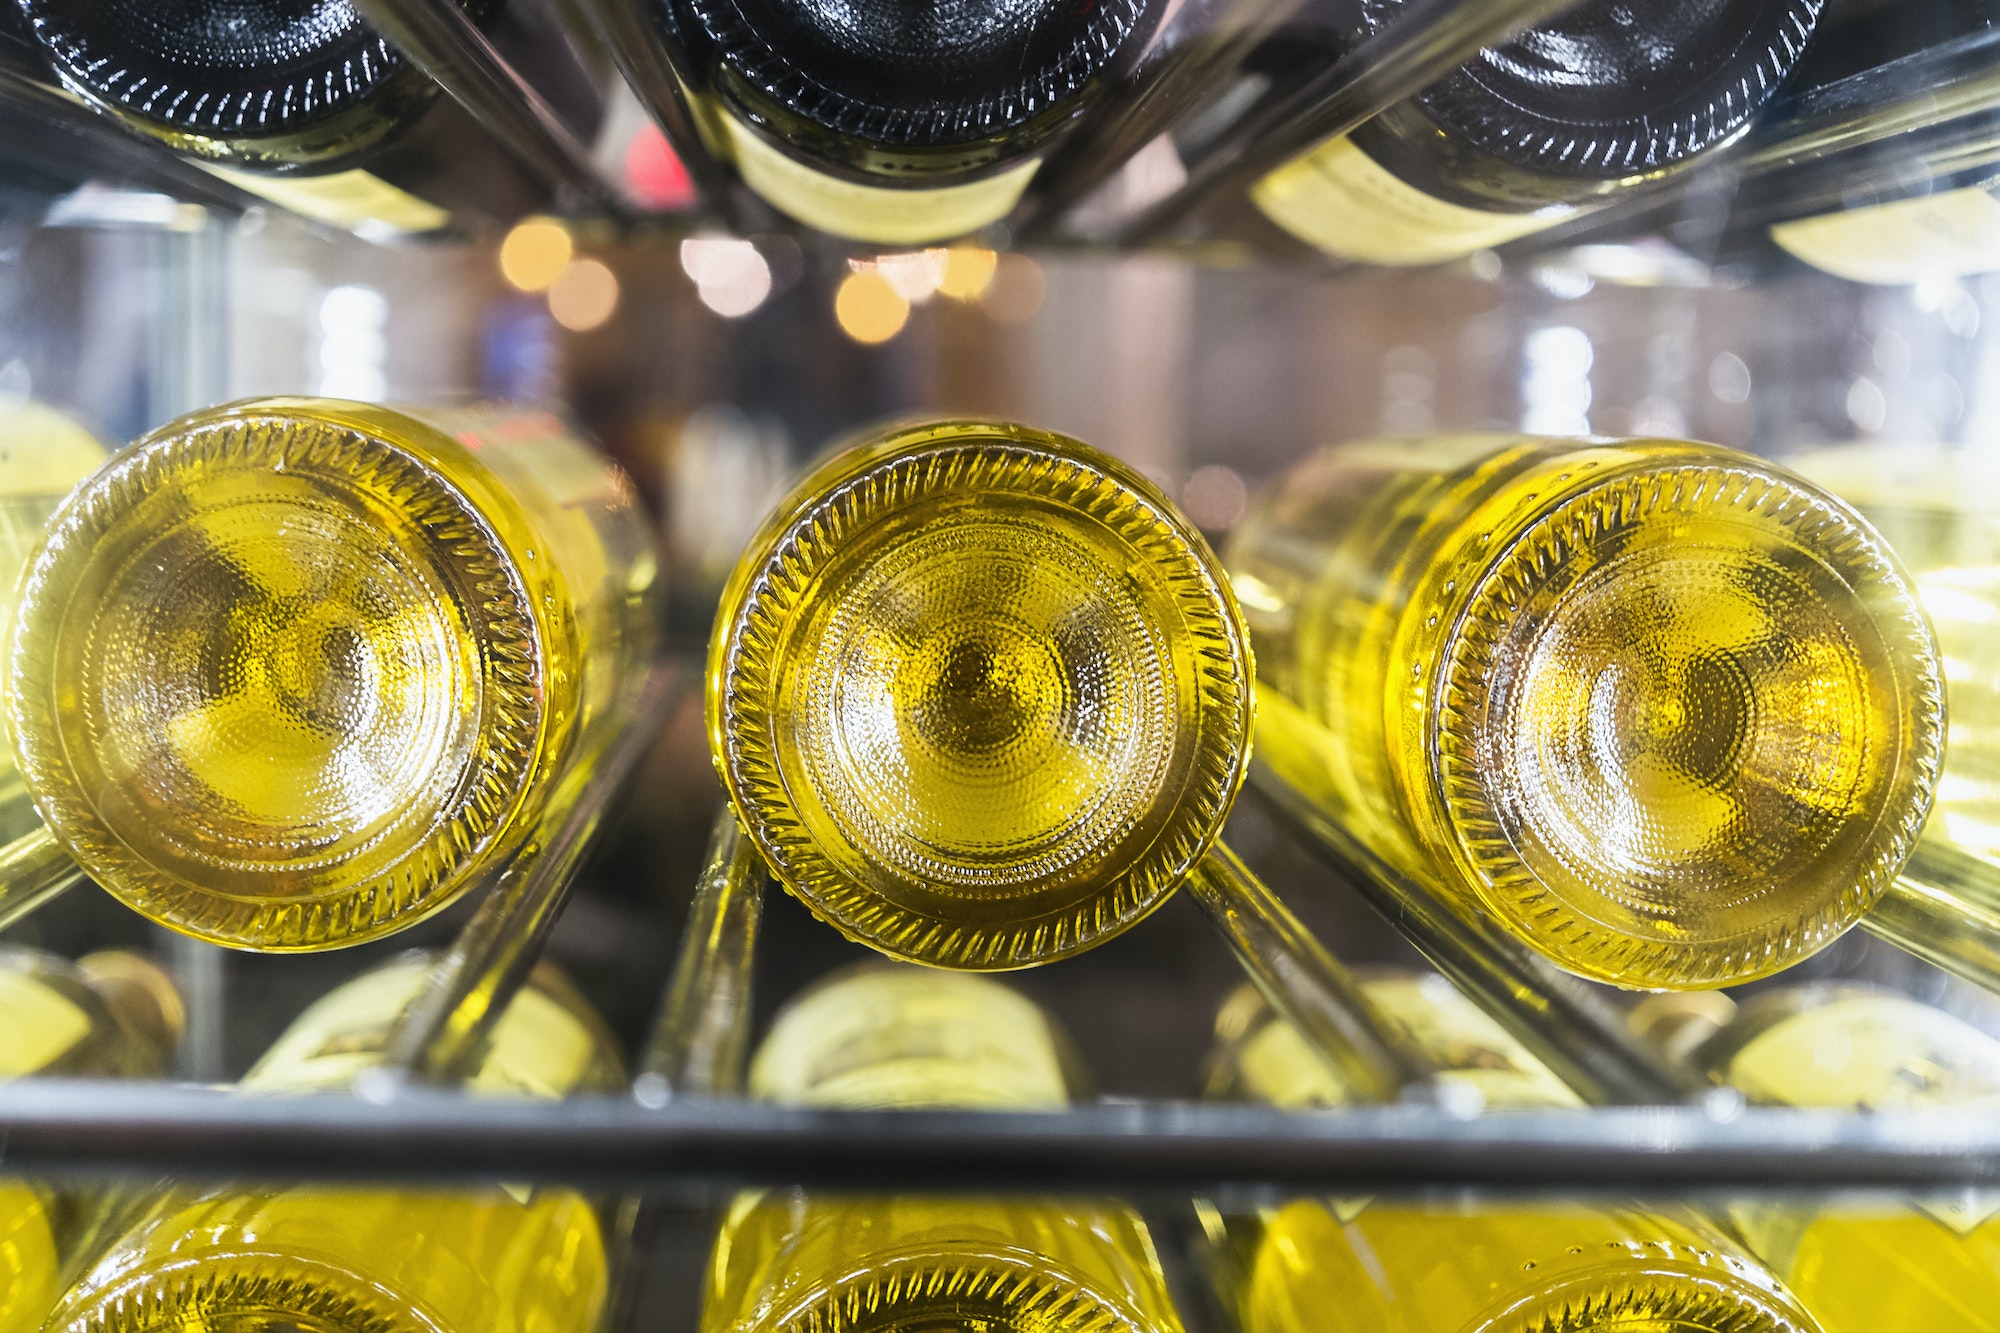 View of bottles of white wine laid down on a rack in a cellar.